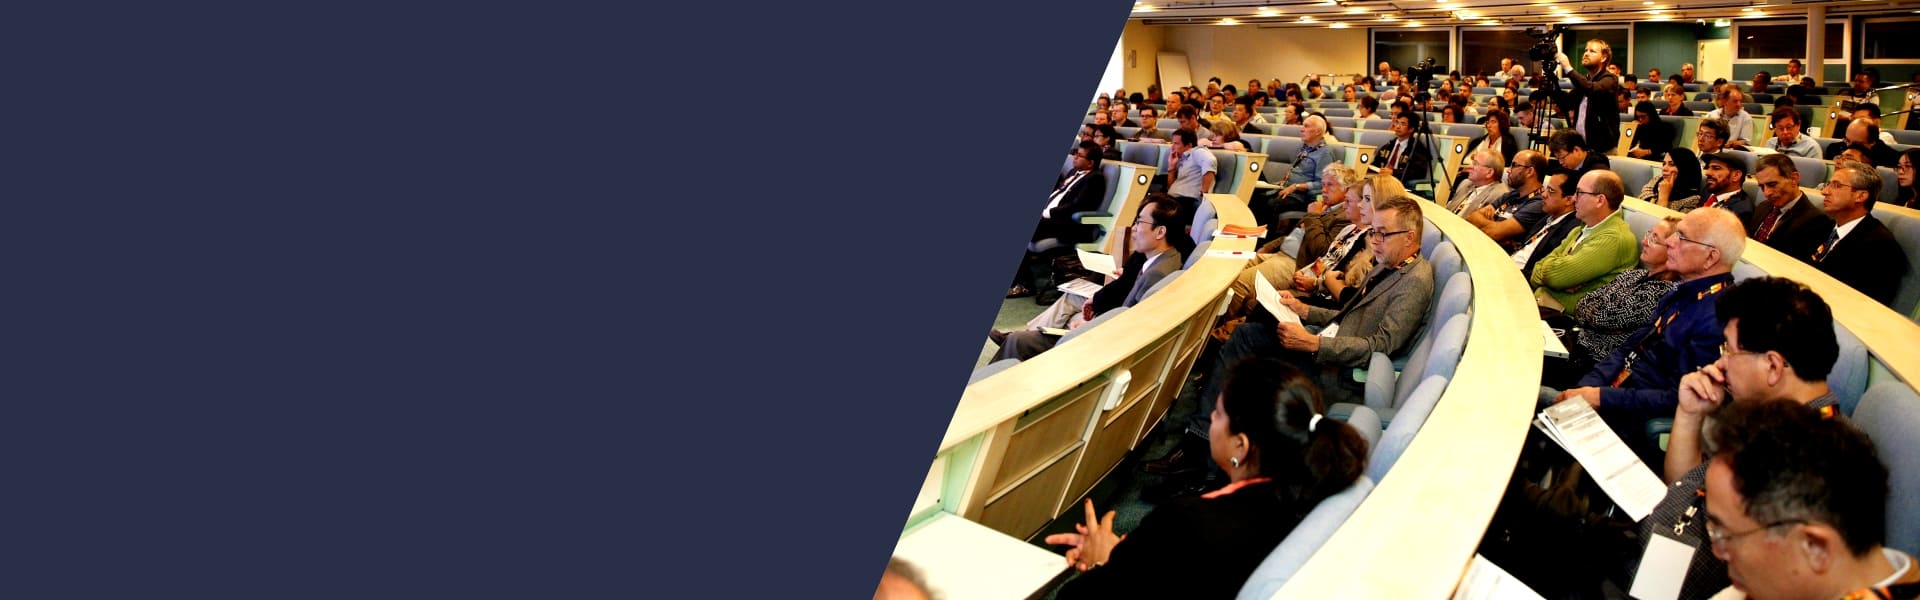 Materials Science Events and Conferences That Offer Extensive Discussion Opportunities